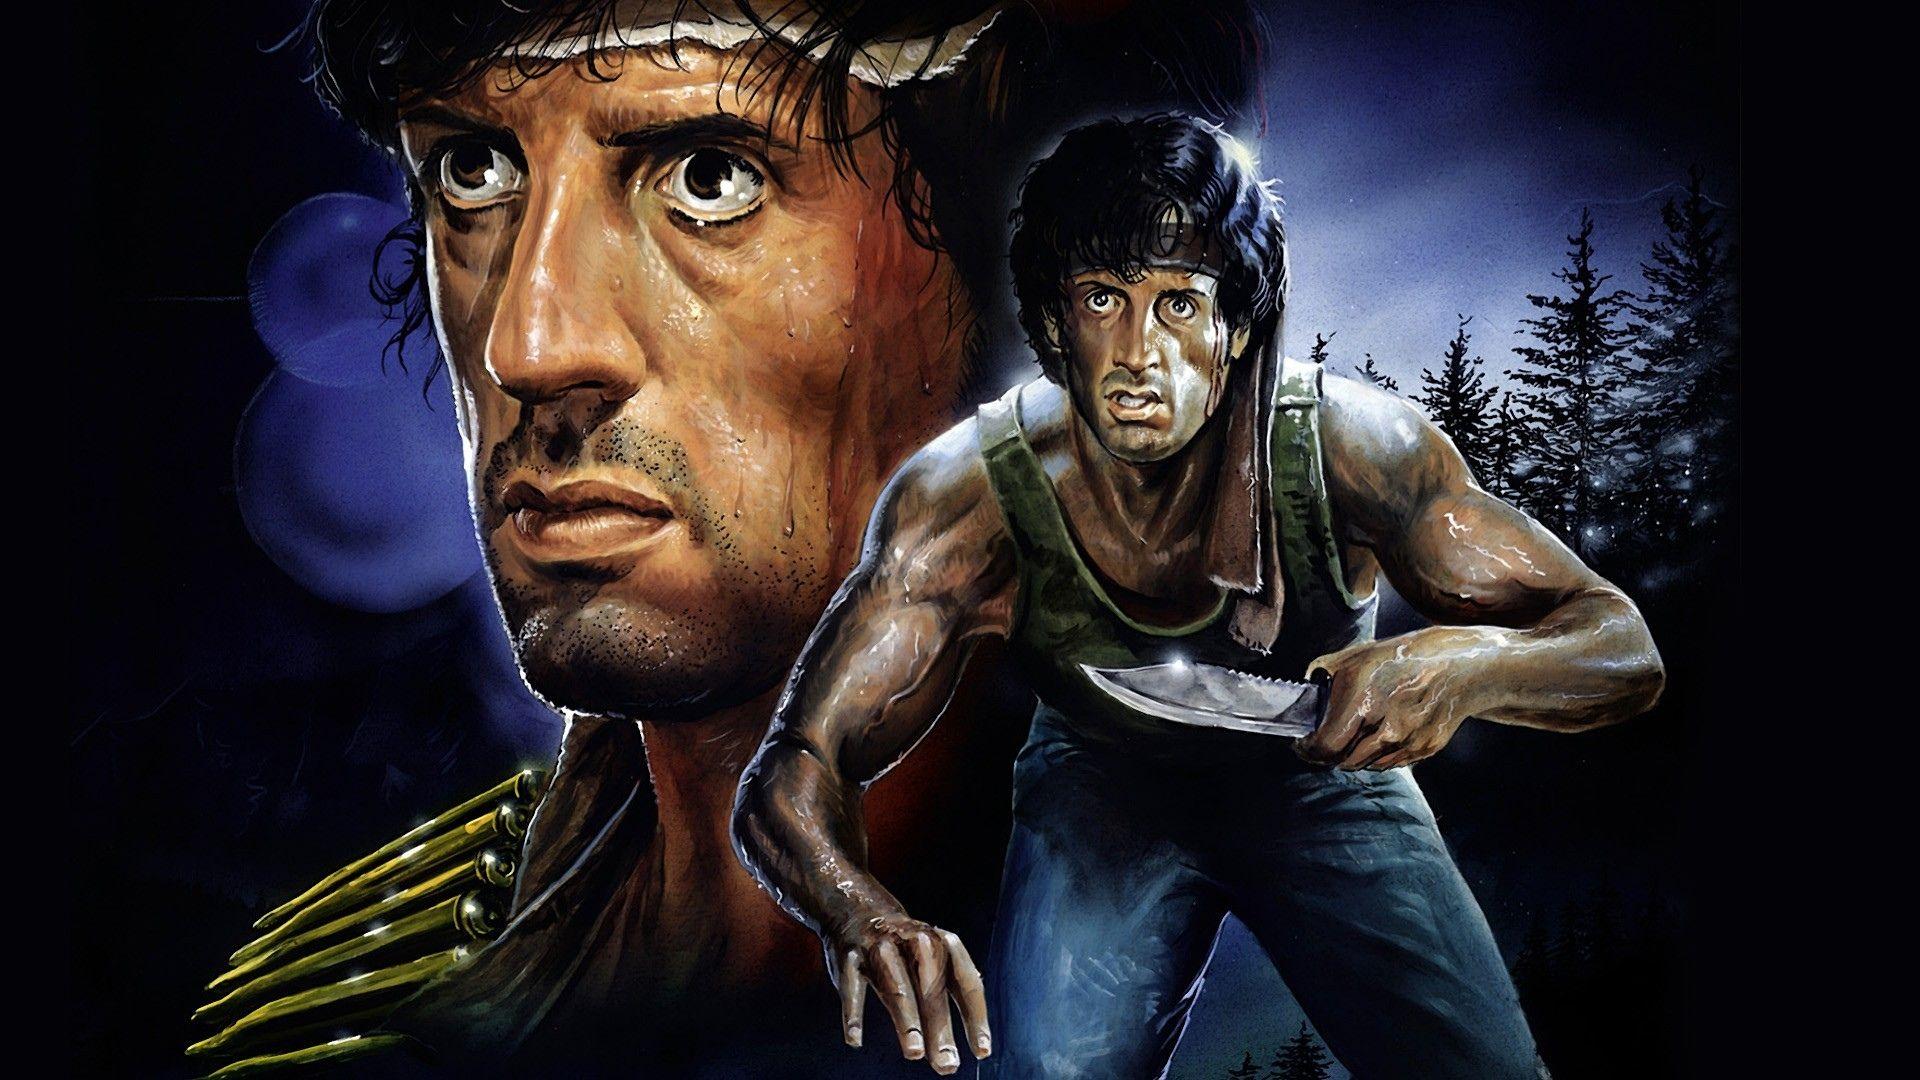 Wallpaper Rambo Sylvester Stallone Warriors Knife Movies download